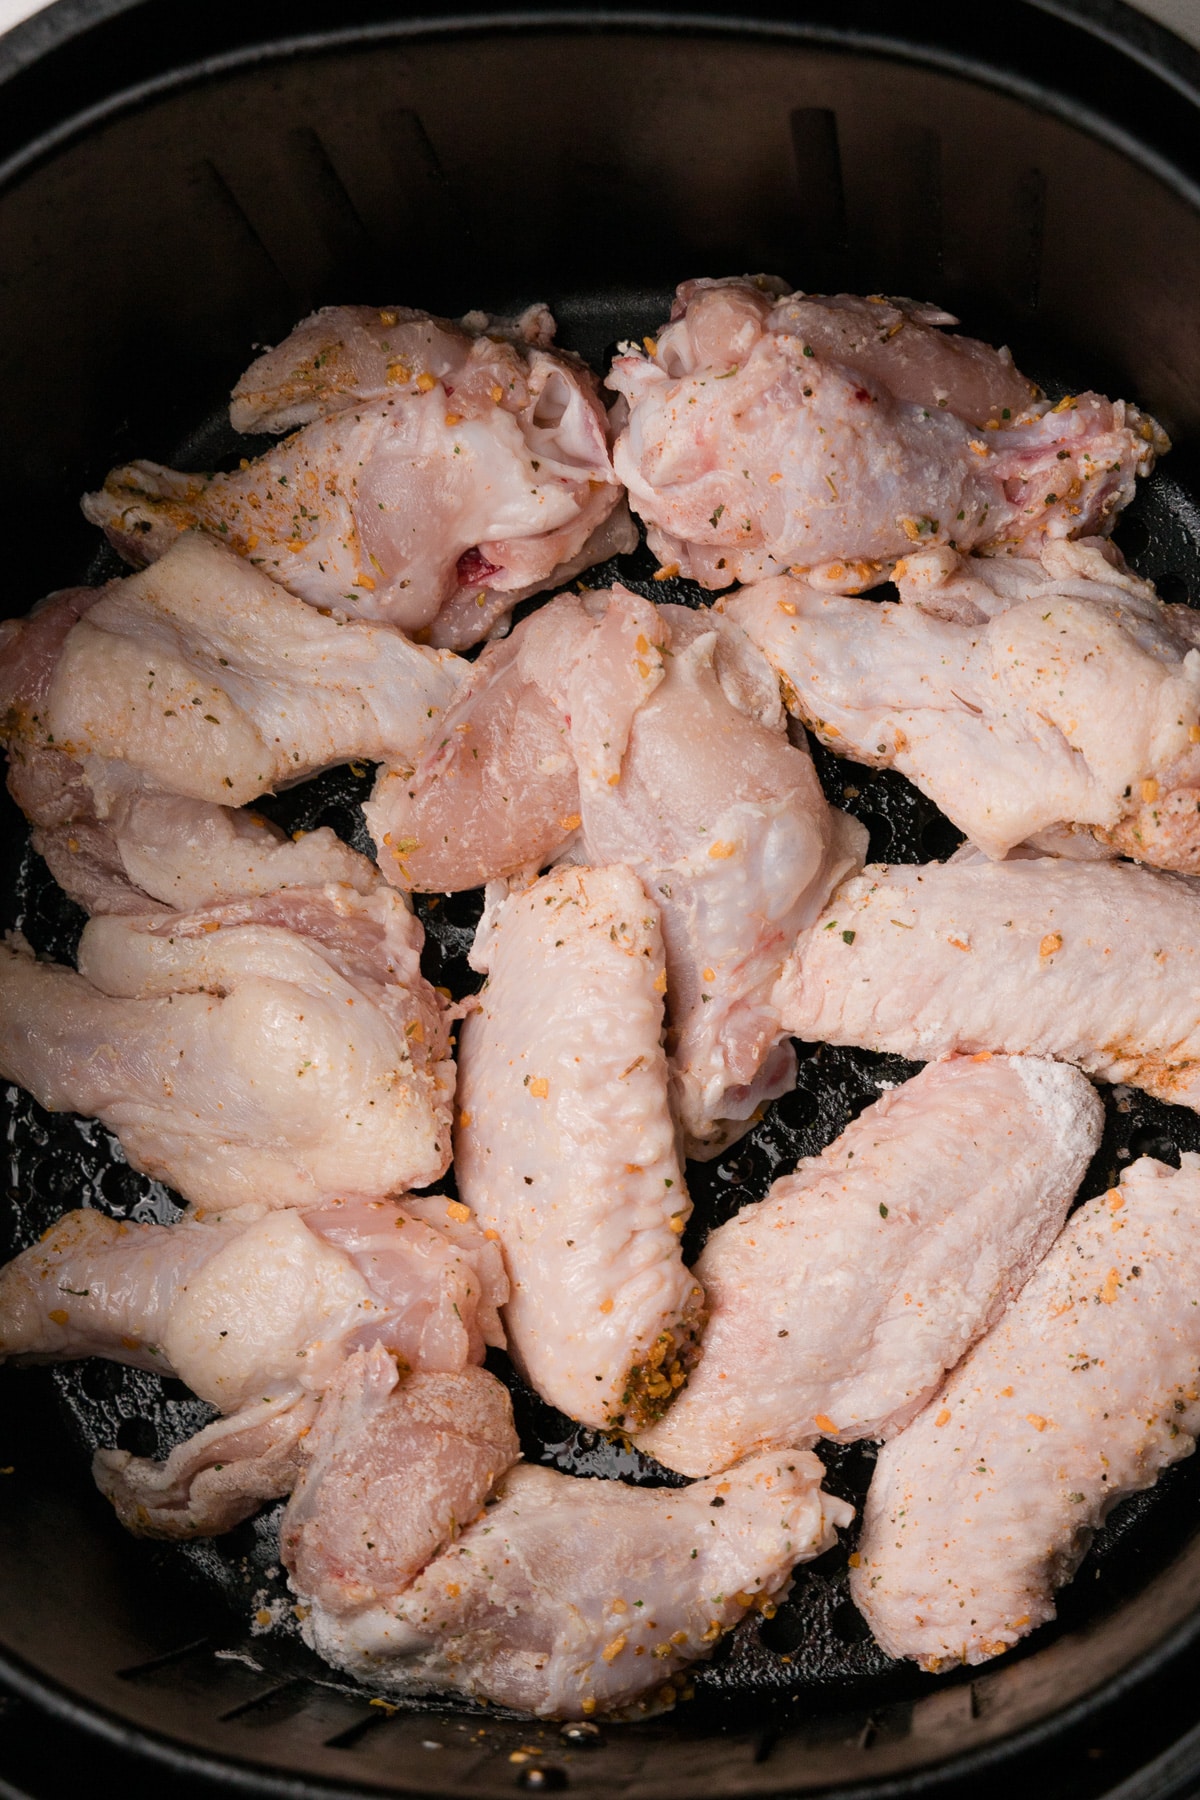 Wings ready to cook in the air fryer.